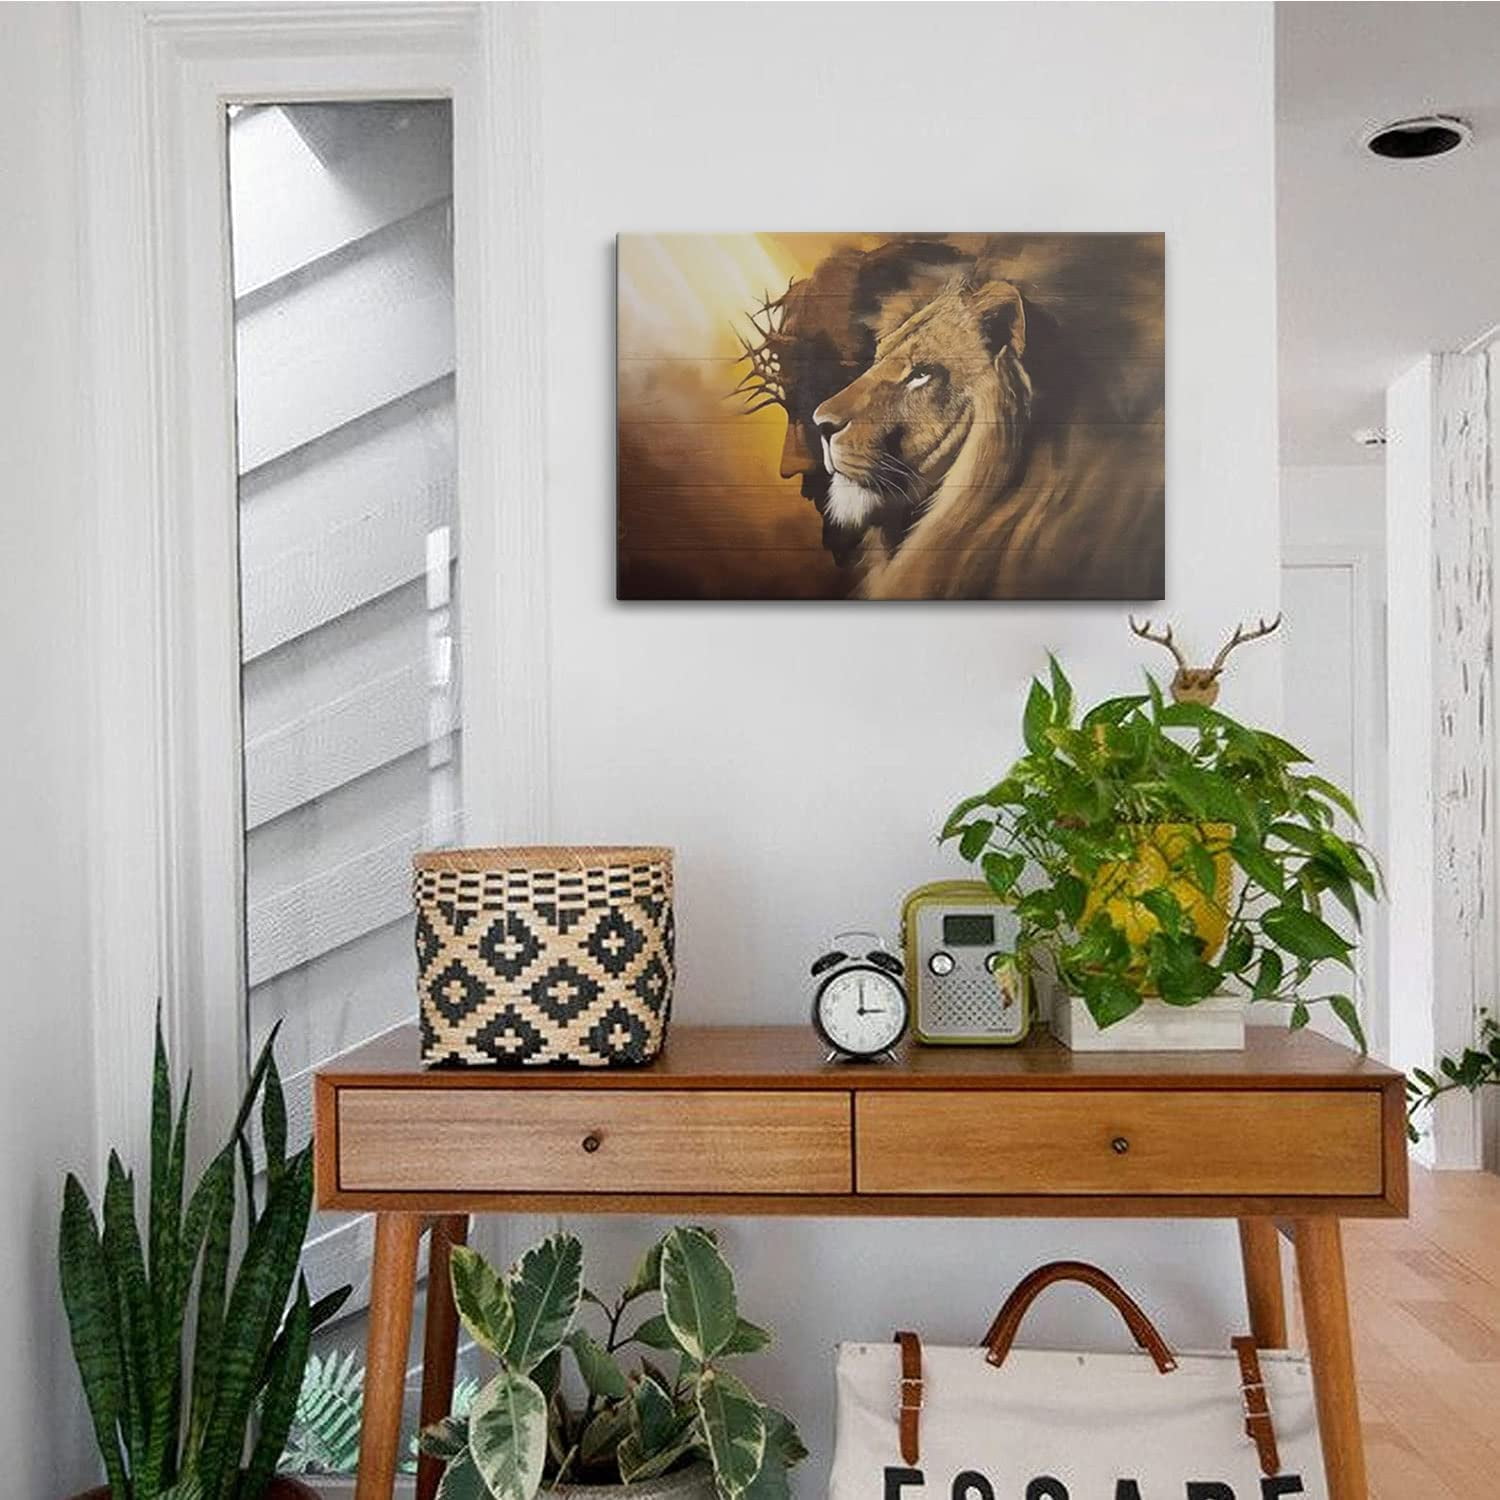 58 Best Wall Art Ideas For Every Room - Cool Wall Decor And Prints